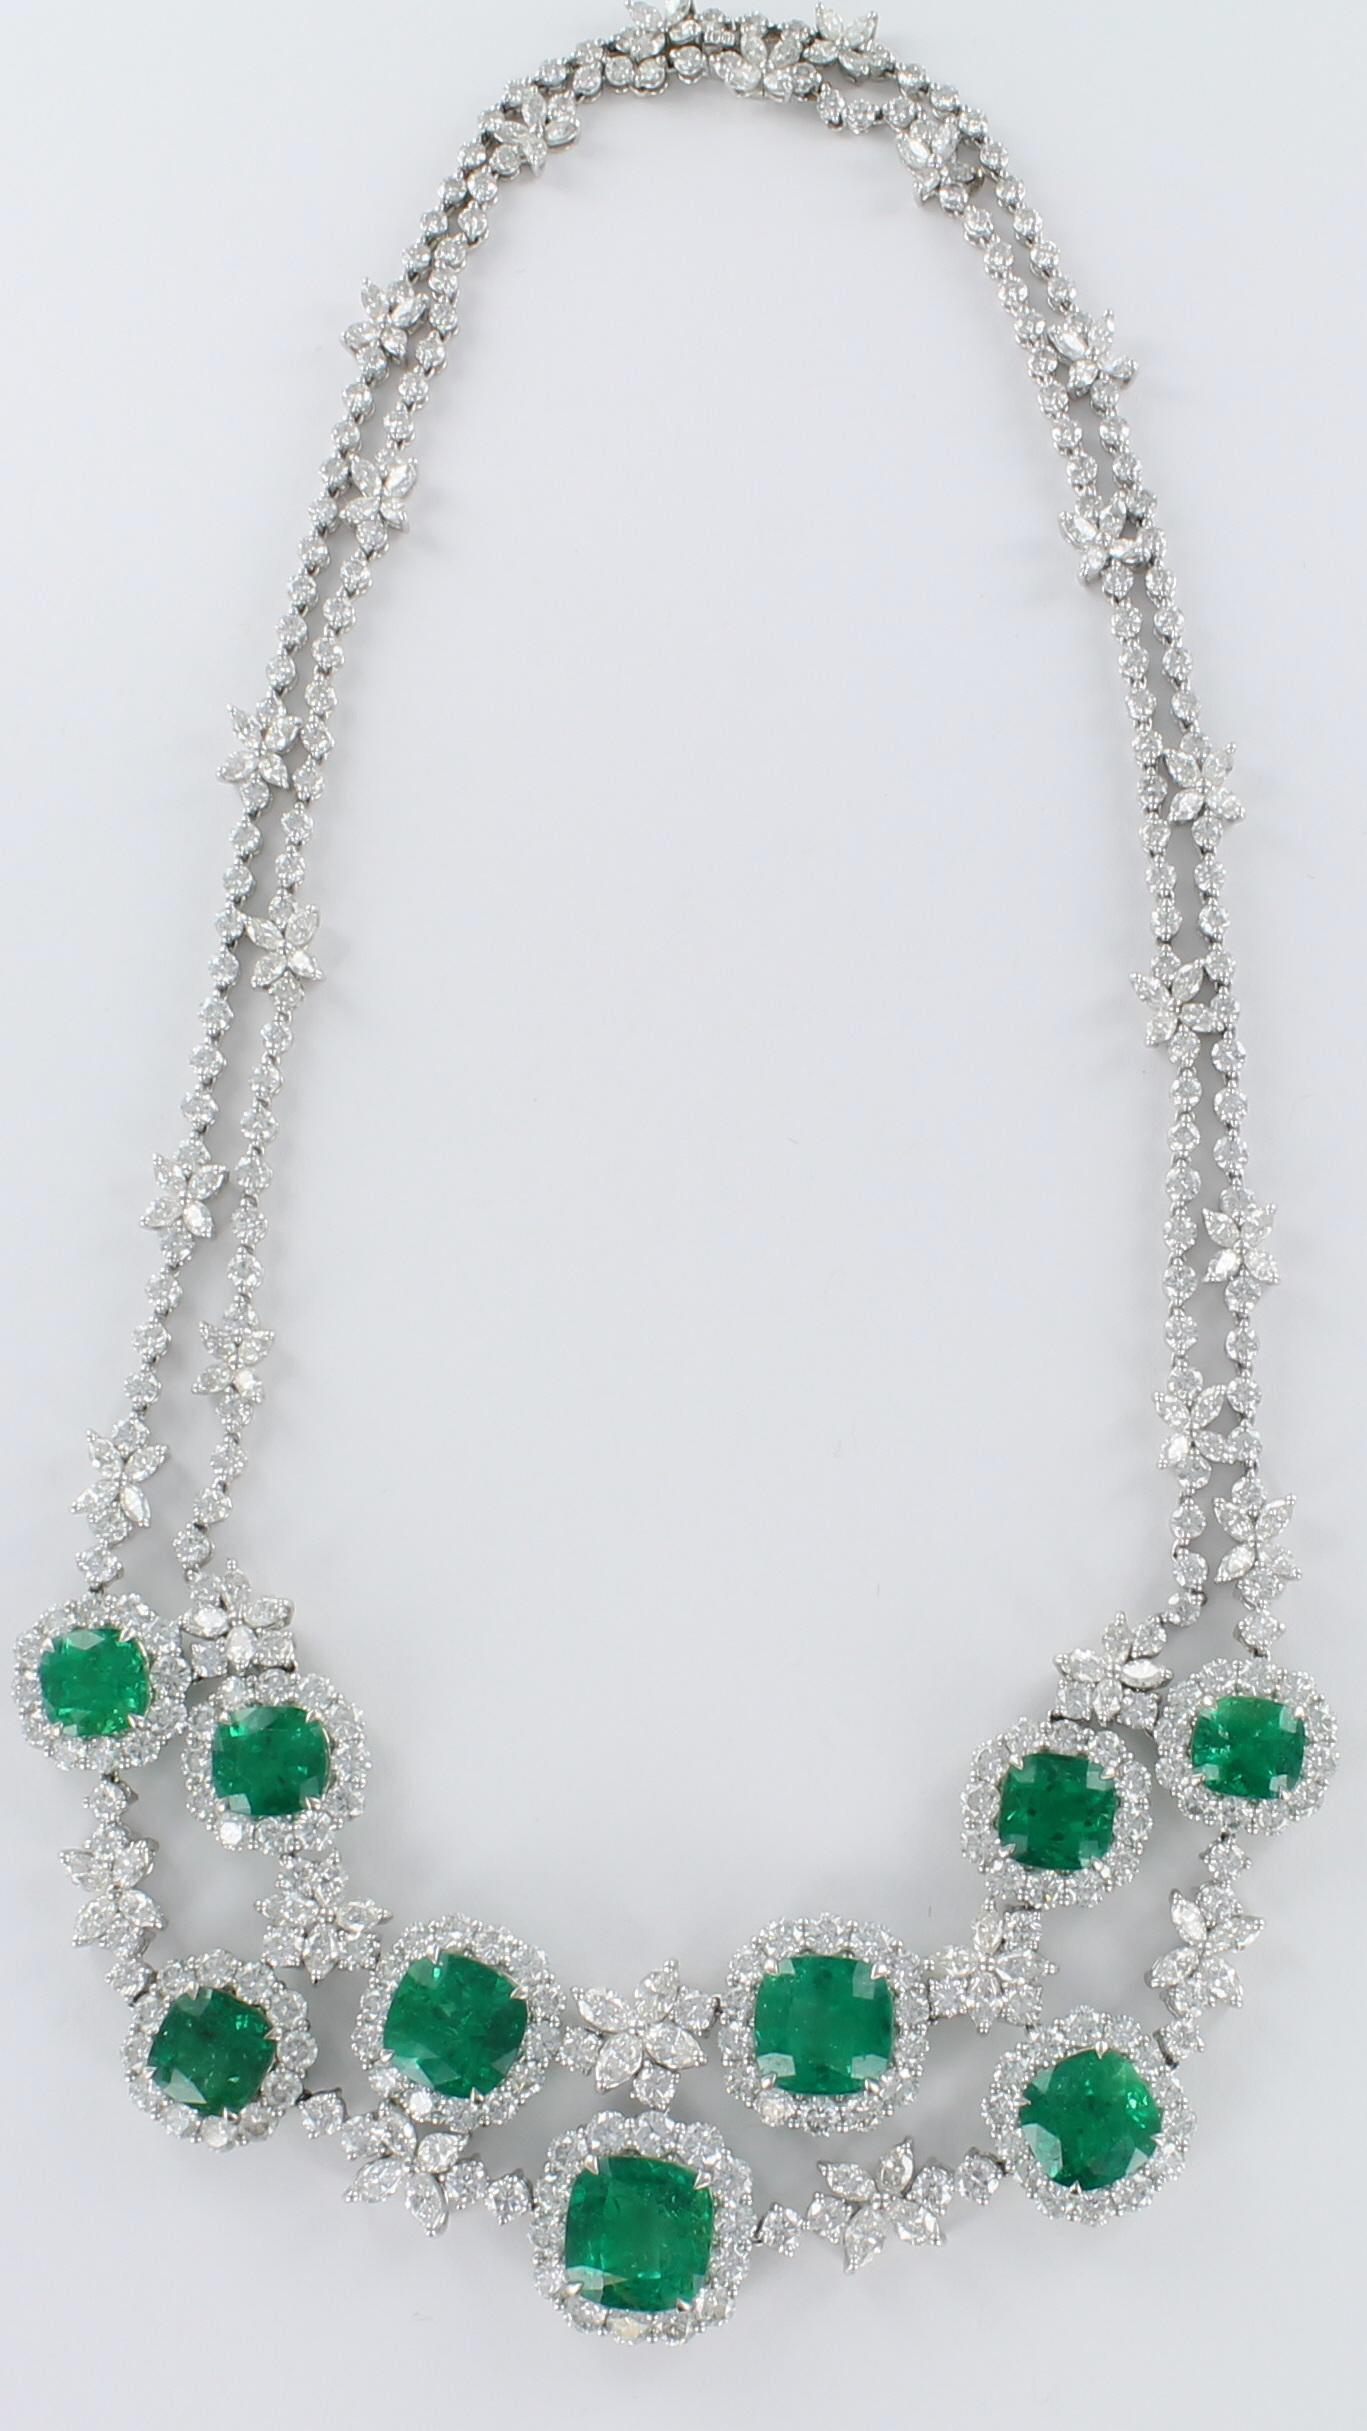 This is a sensational 18 karat white gold necklace featuring emeralds and diamonds designed as a double strand.  There are nine cushion-cut emeralds totaling 31.70 carats and 20.00 carats total weight of round and marquise diamonds.  The emeralds